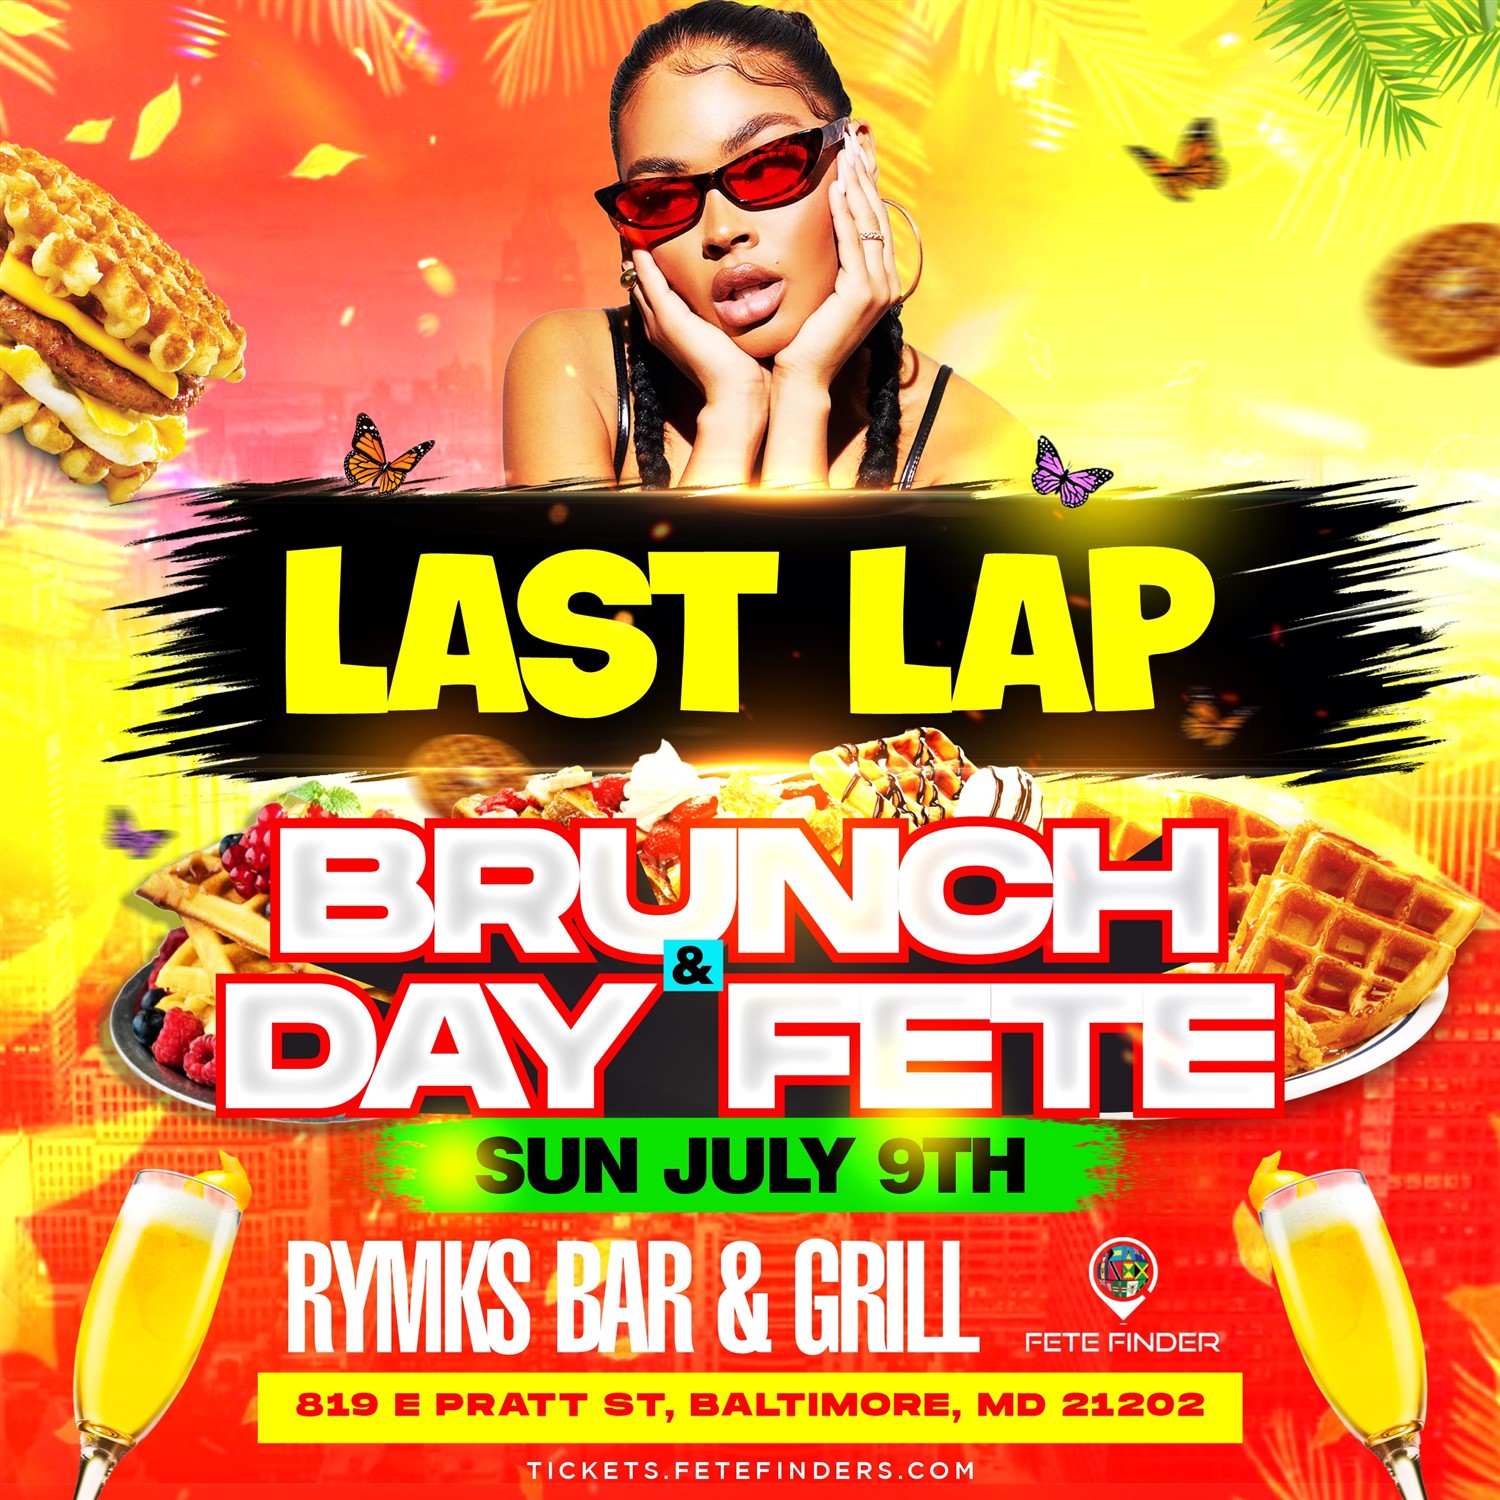 LAST LAP BRUNCH & DAY FETE Baltimore Carnival on Jul 09, 12:00@RYMKS Bar and Lounge - Buy tickets and Get information on www.fetefinders.com tickets.fetefinders.com